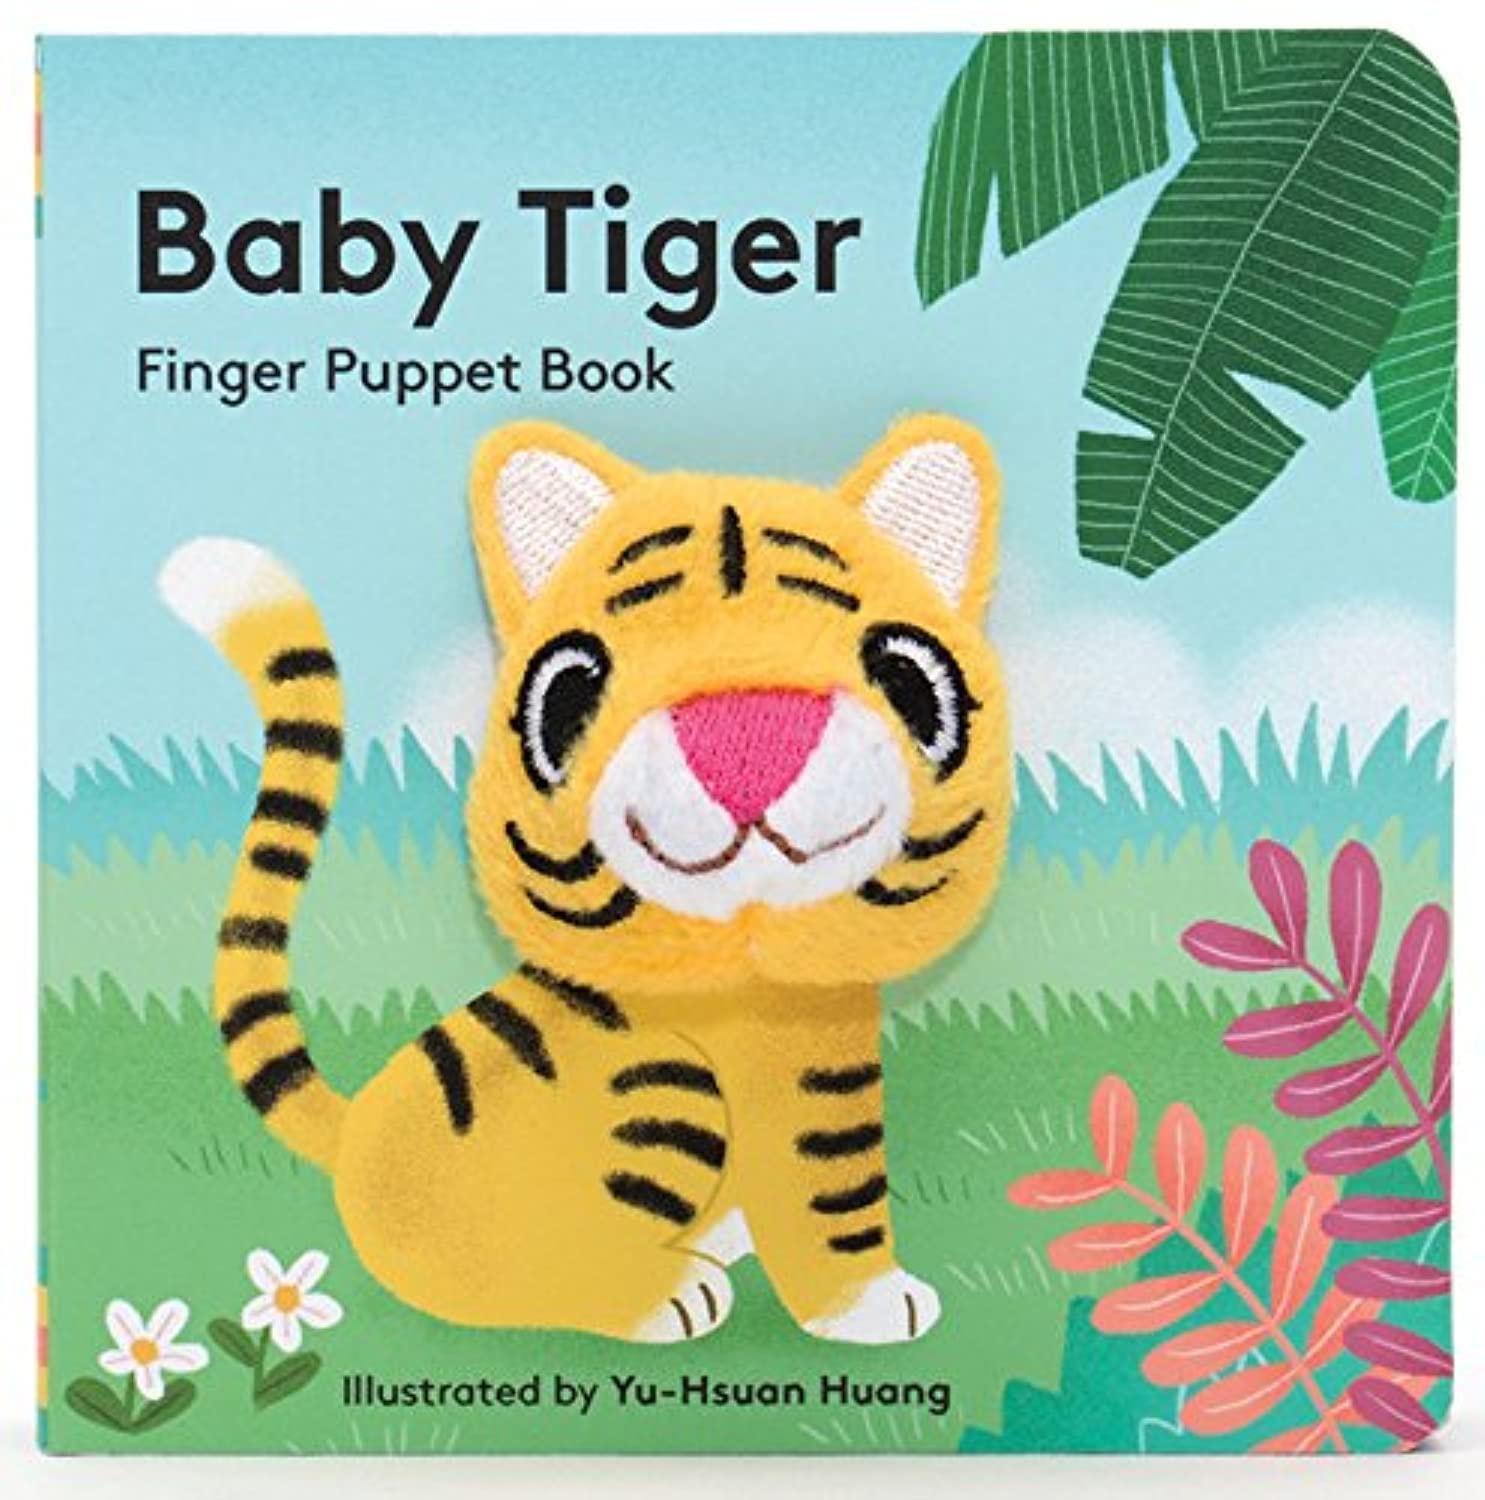 hachette book group Finger Puppet Baby Tiger